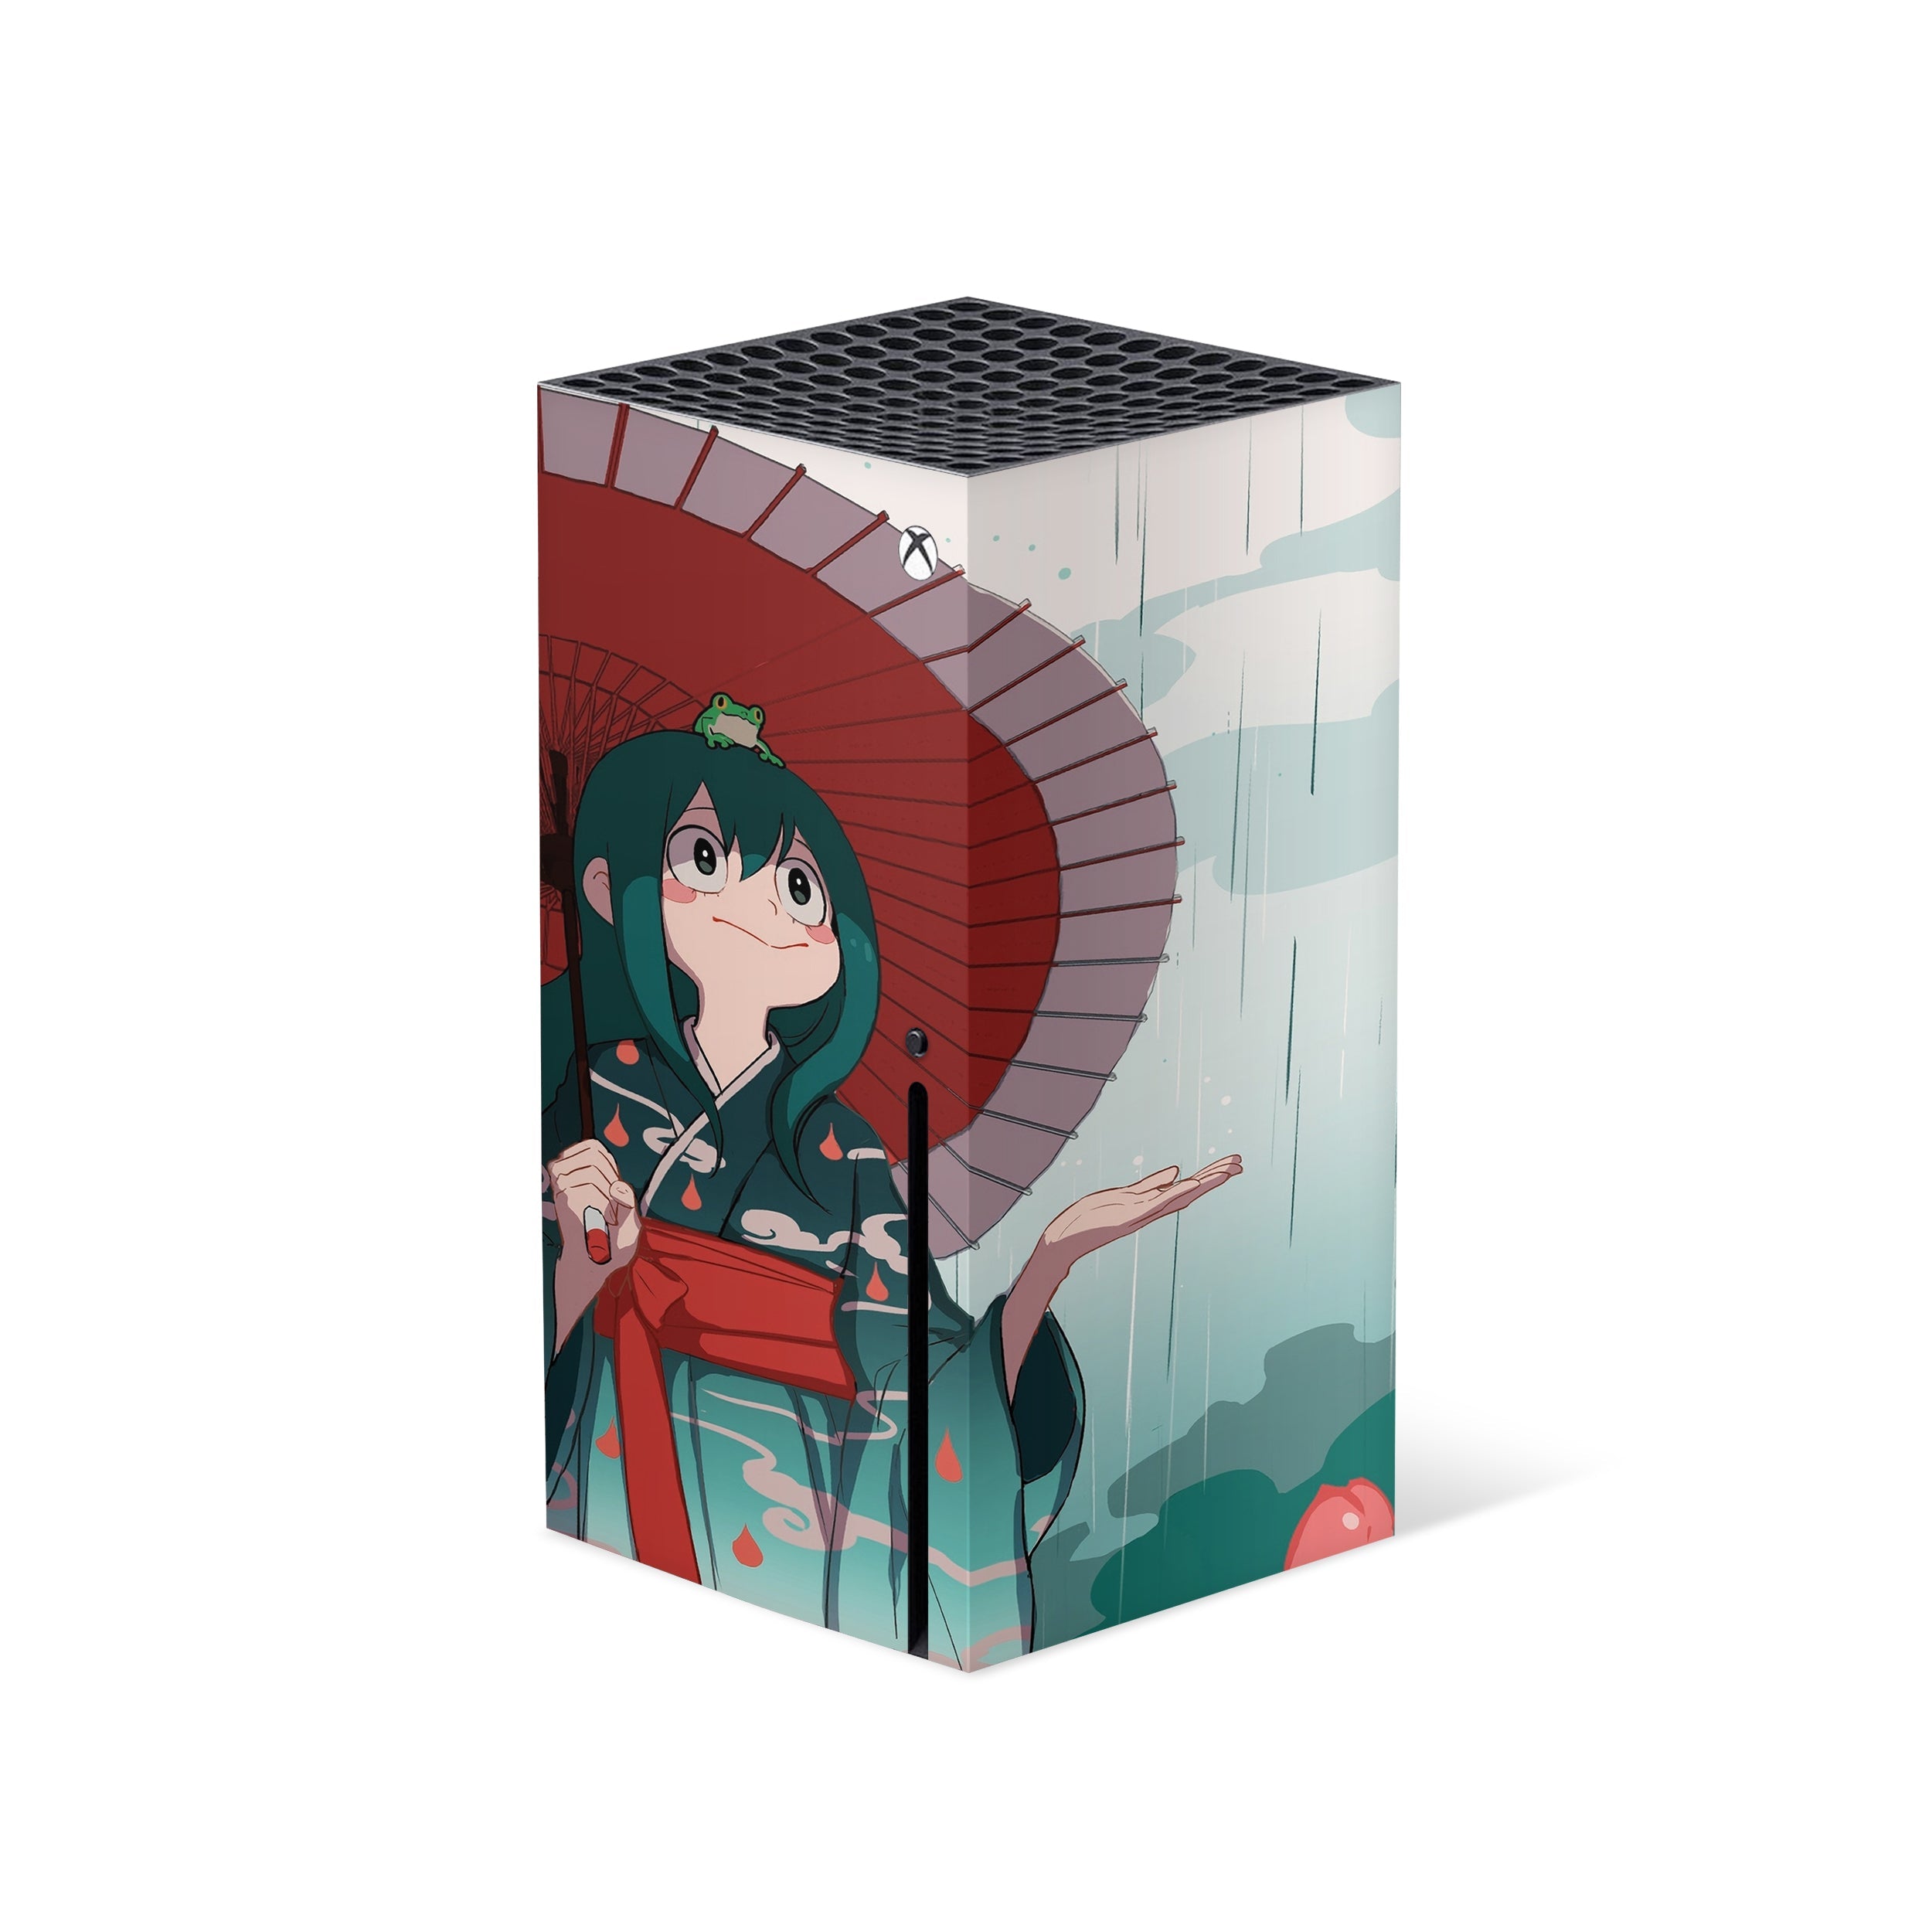 A video game skin featuring a My Hero Academia Tsuyu Asui design for the Xbox Series X.